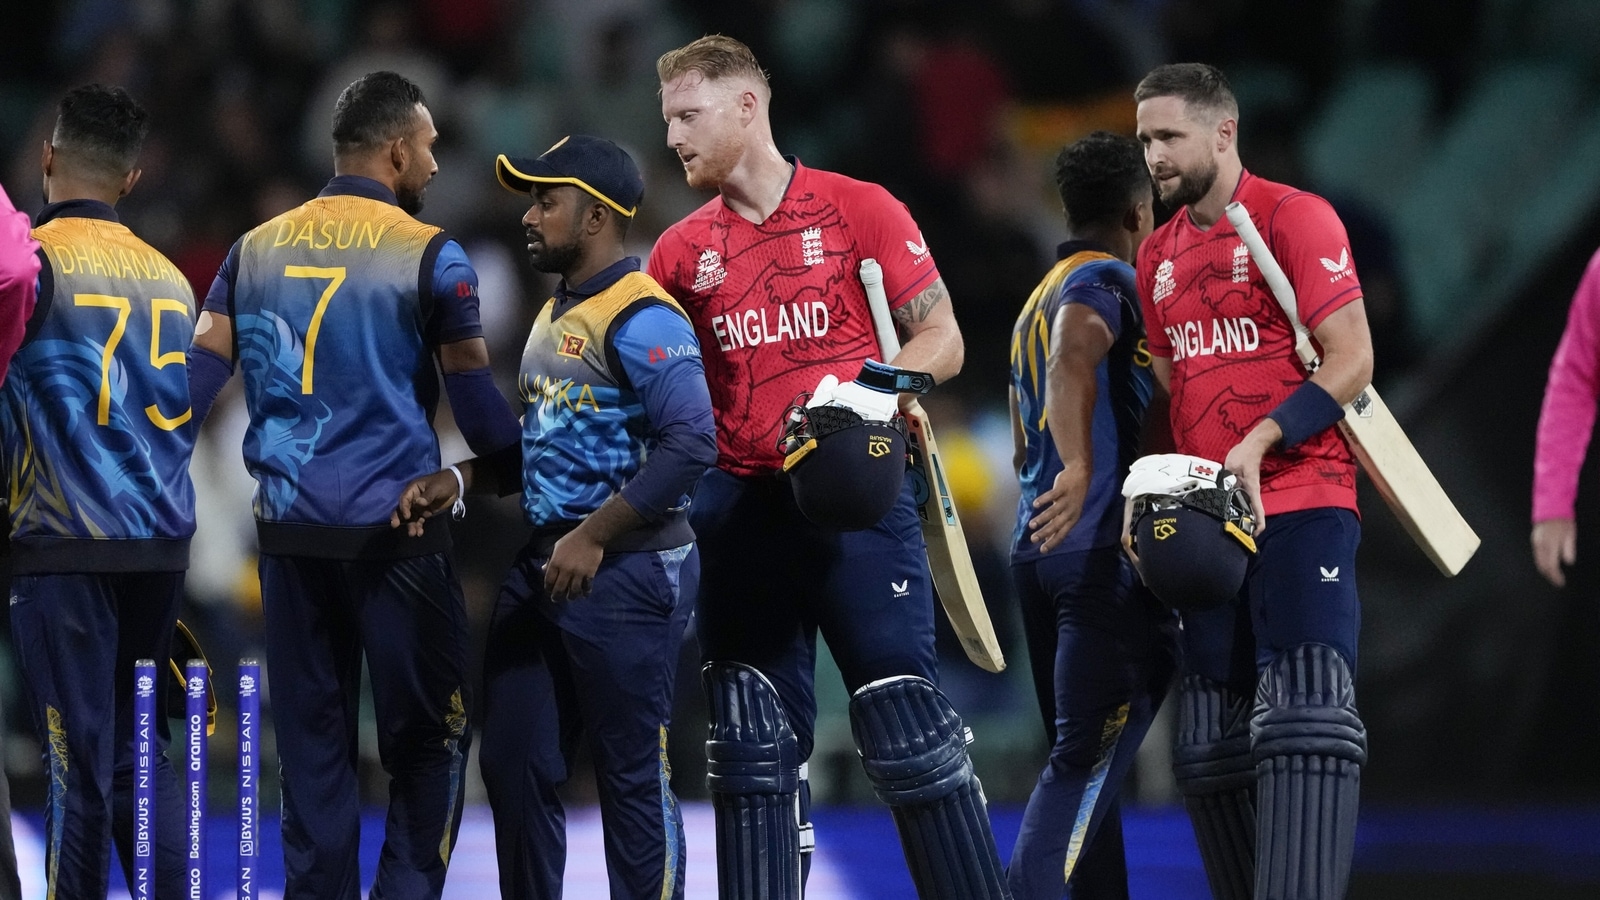 Sri Lanka vs England, T20 World Cup 2022 Highlights ENG qualify for semis after tense 4-wicket win over SL Hindustan Times